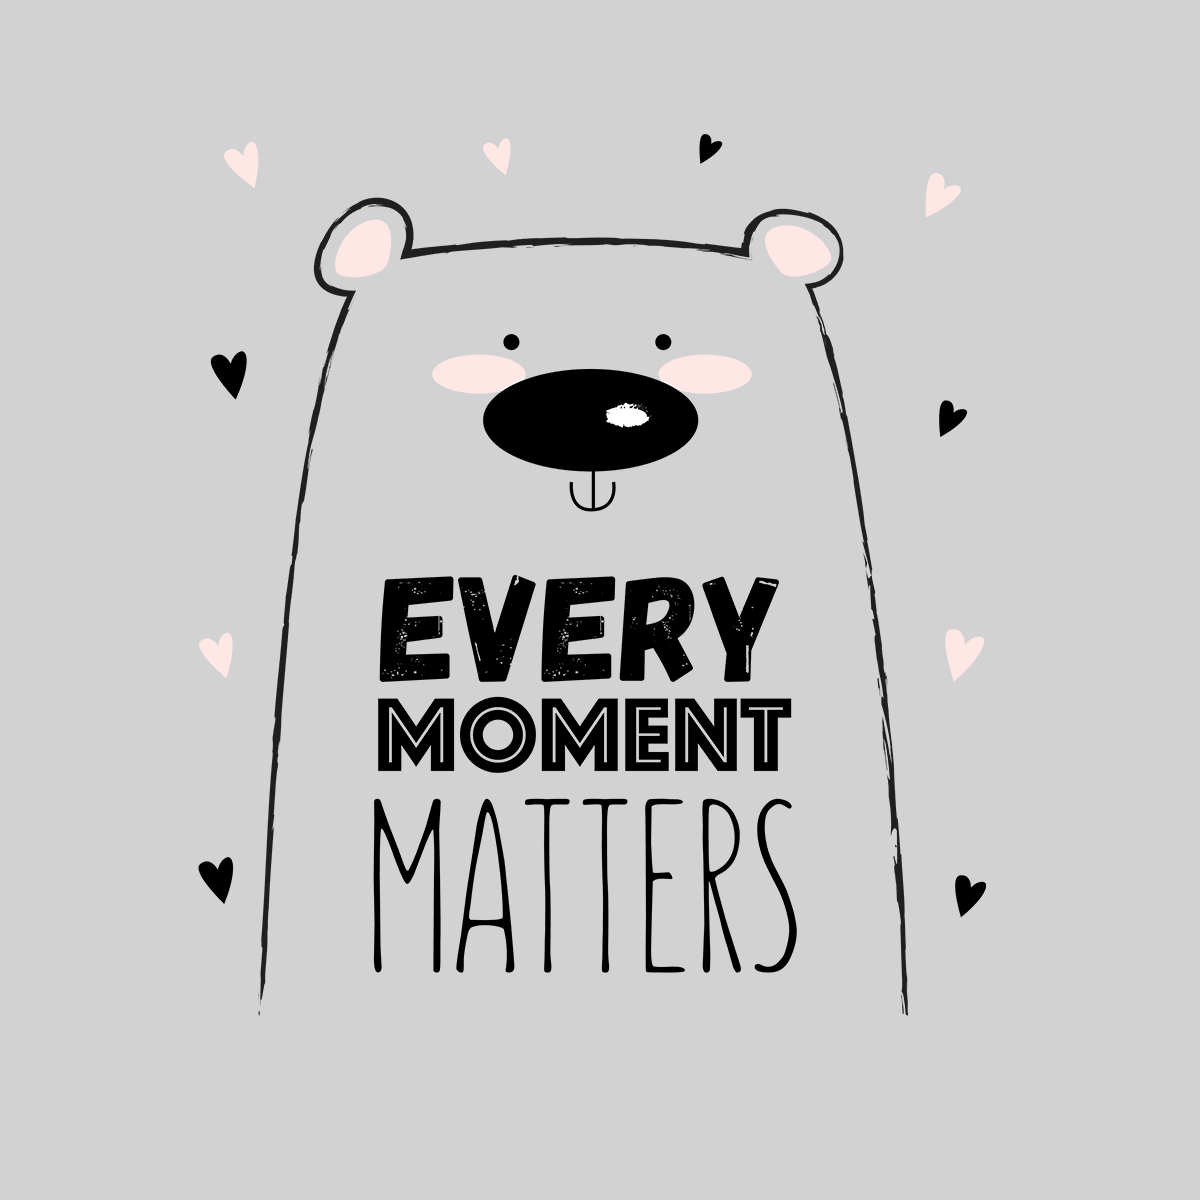 Every Moment Matters Animal Quote Funny Unisex Tank Top - Kuzi Tees